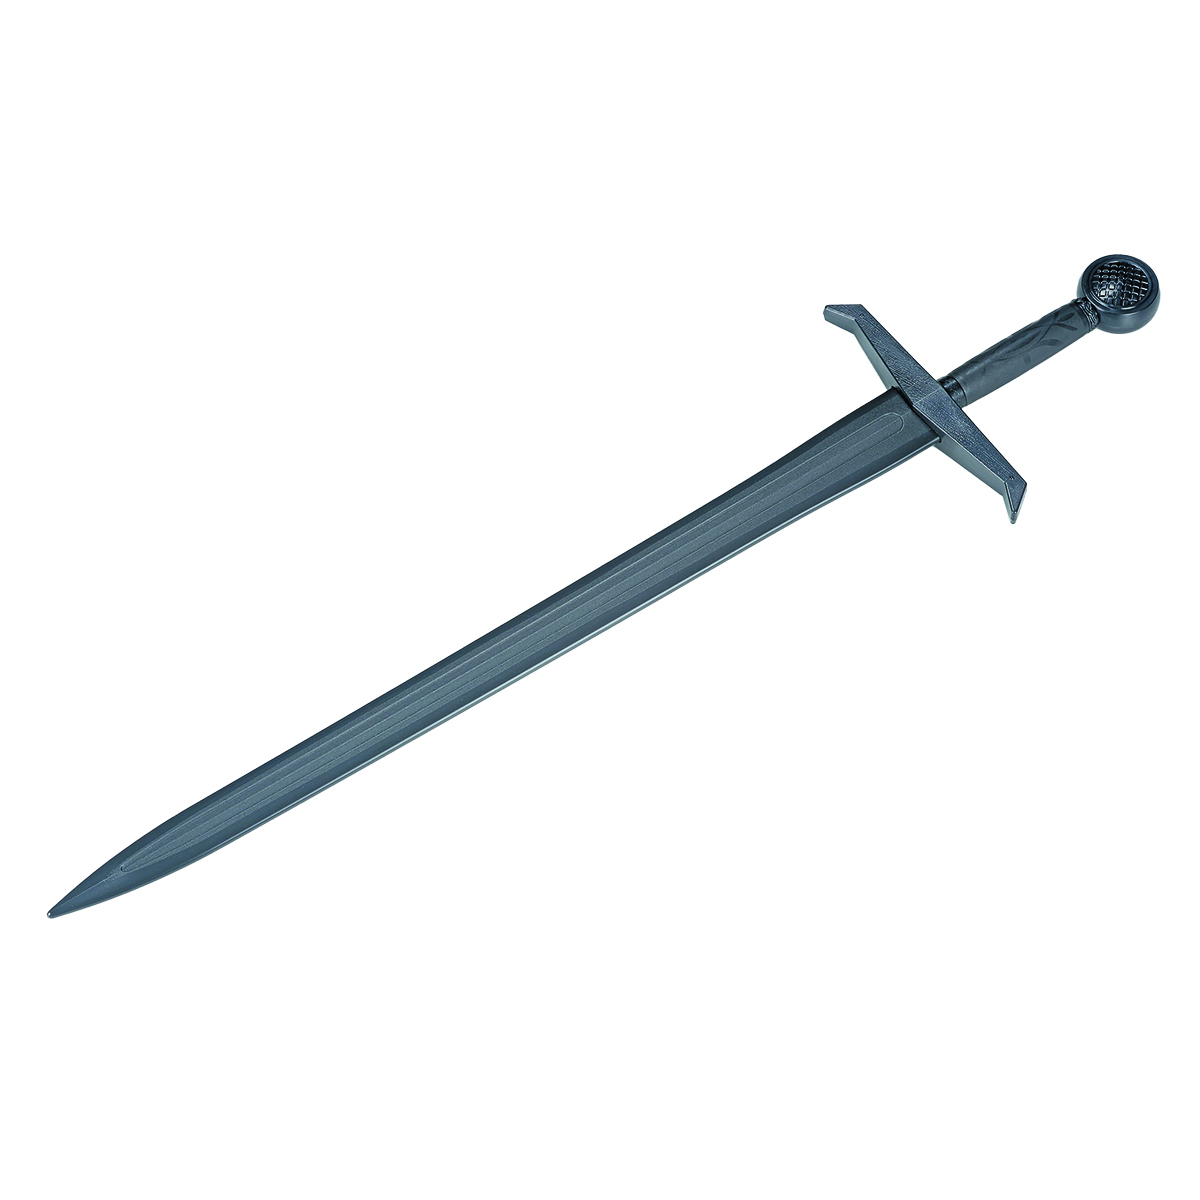 Black Polypropylene Full Contact Knights Sword - 38.5" - Click Image to Close